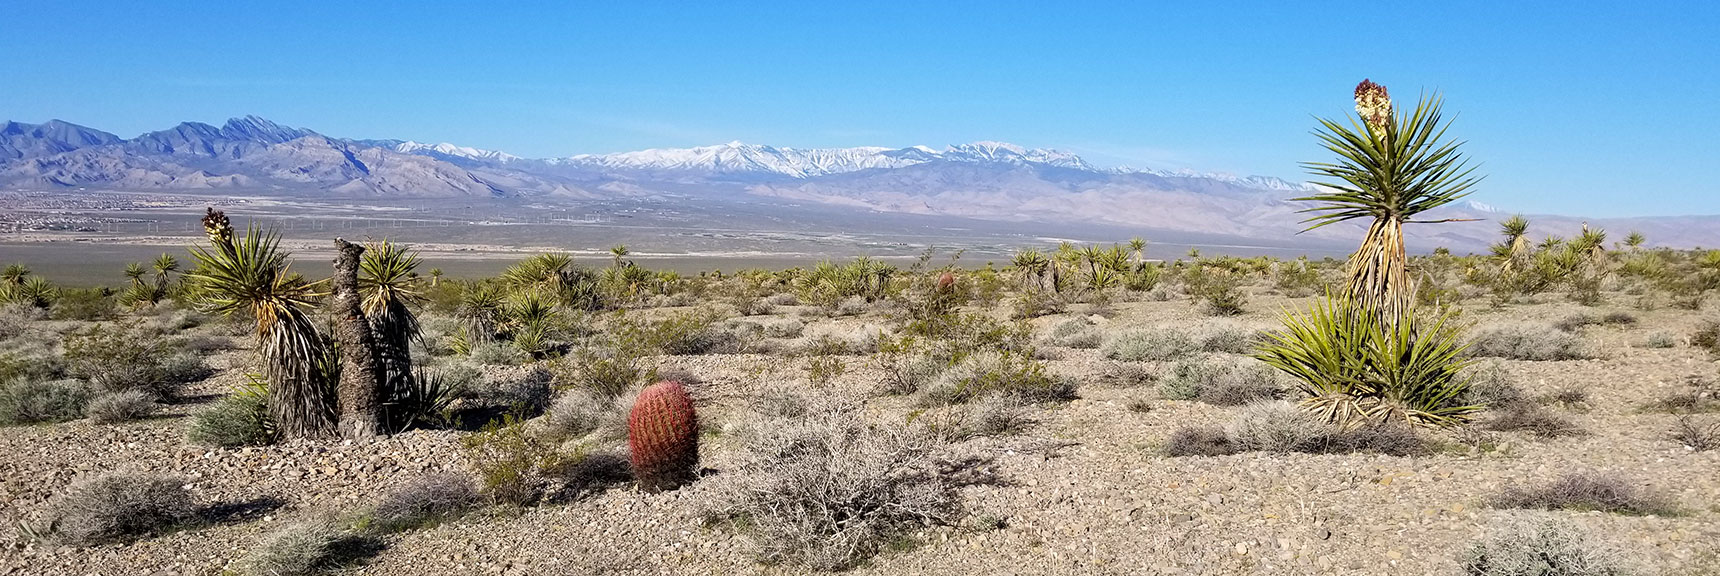 Yucca Plants and Barrel Cactus South of Gass Peak, Nevada